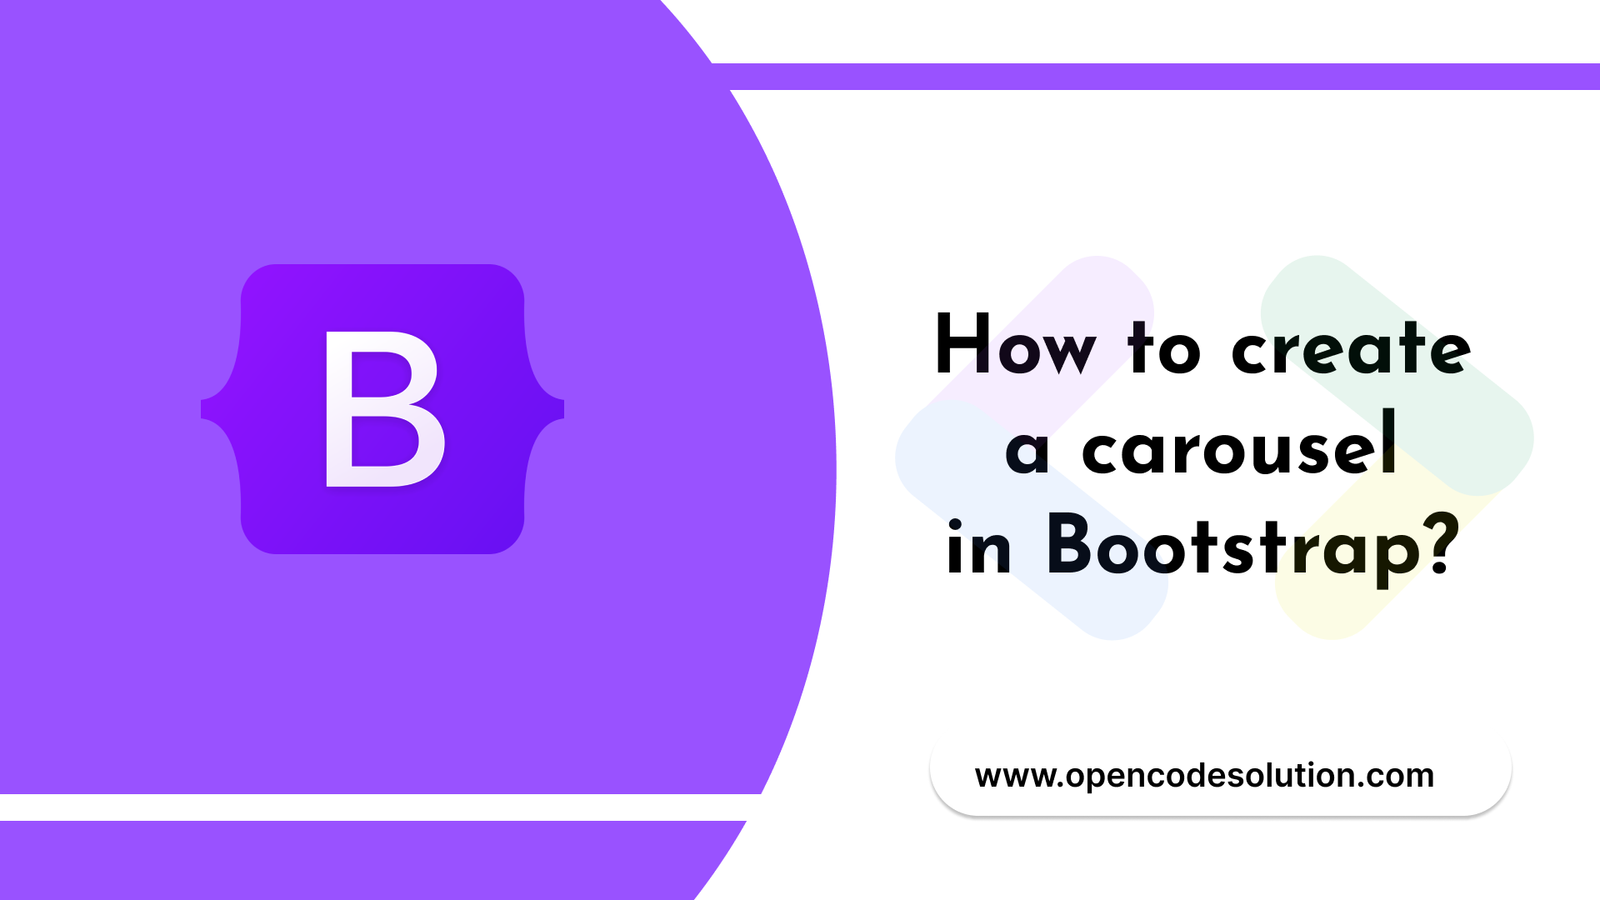 How to create a carousel in Bootstrap?